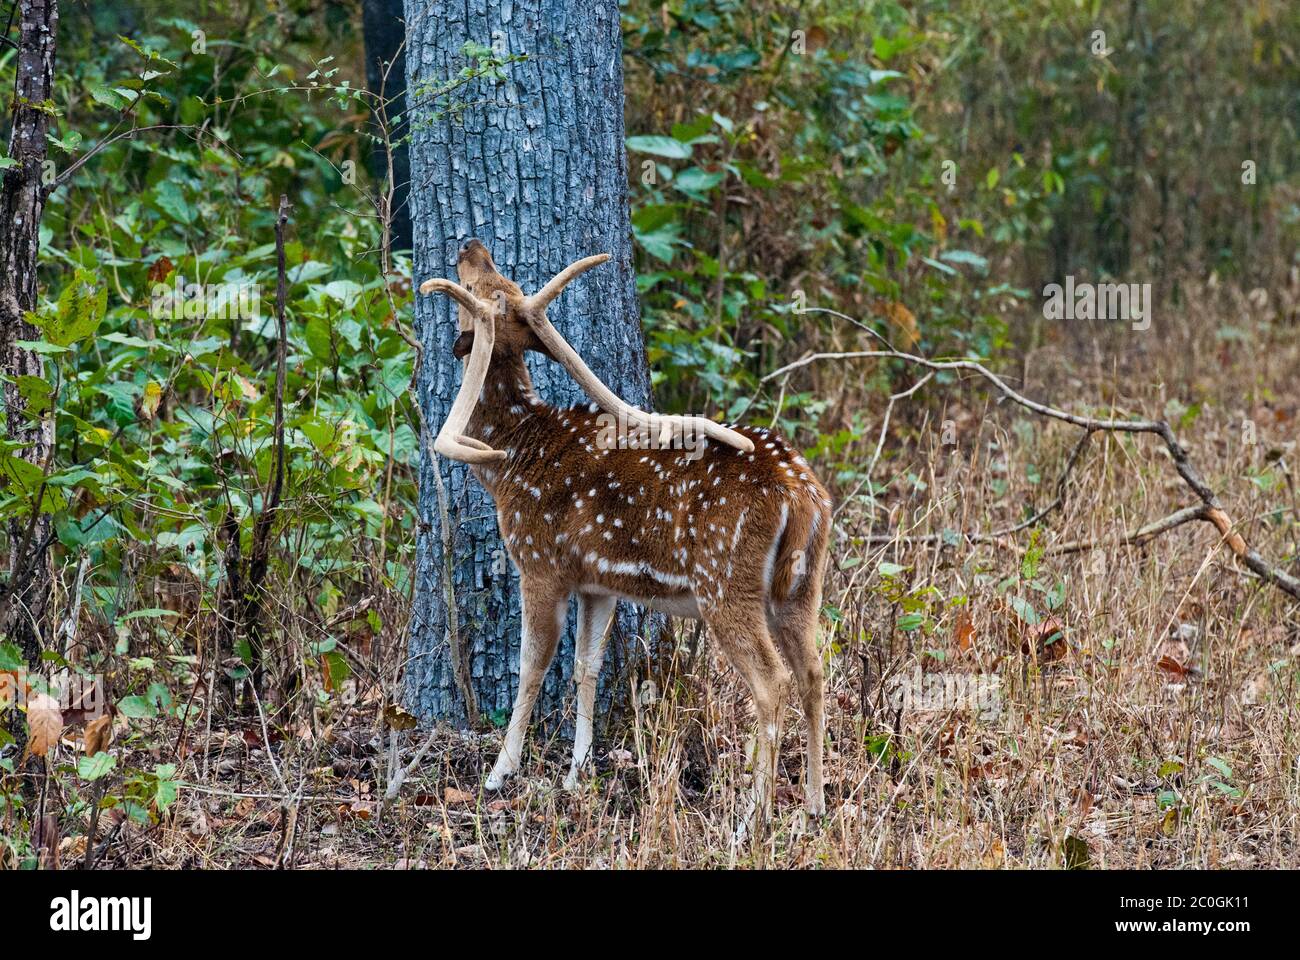 Axis (spotted) deer buck (Axis axis) in Bandhavgarh National Park India Stock Photo